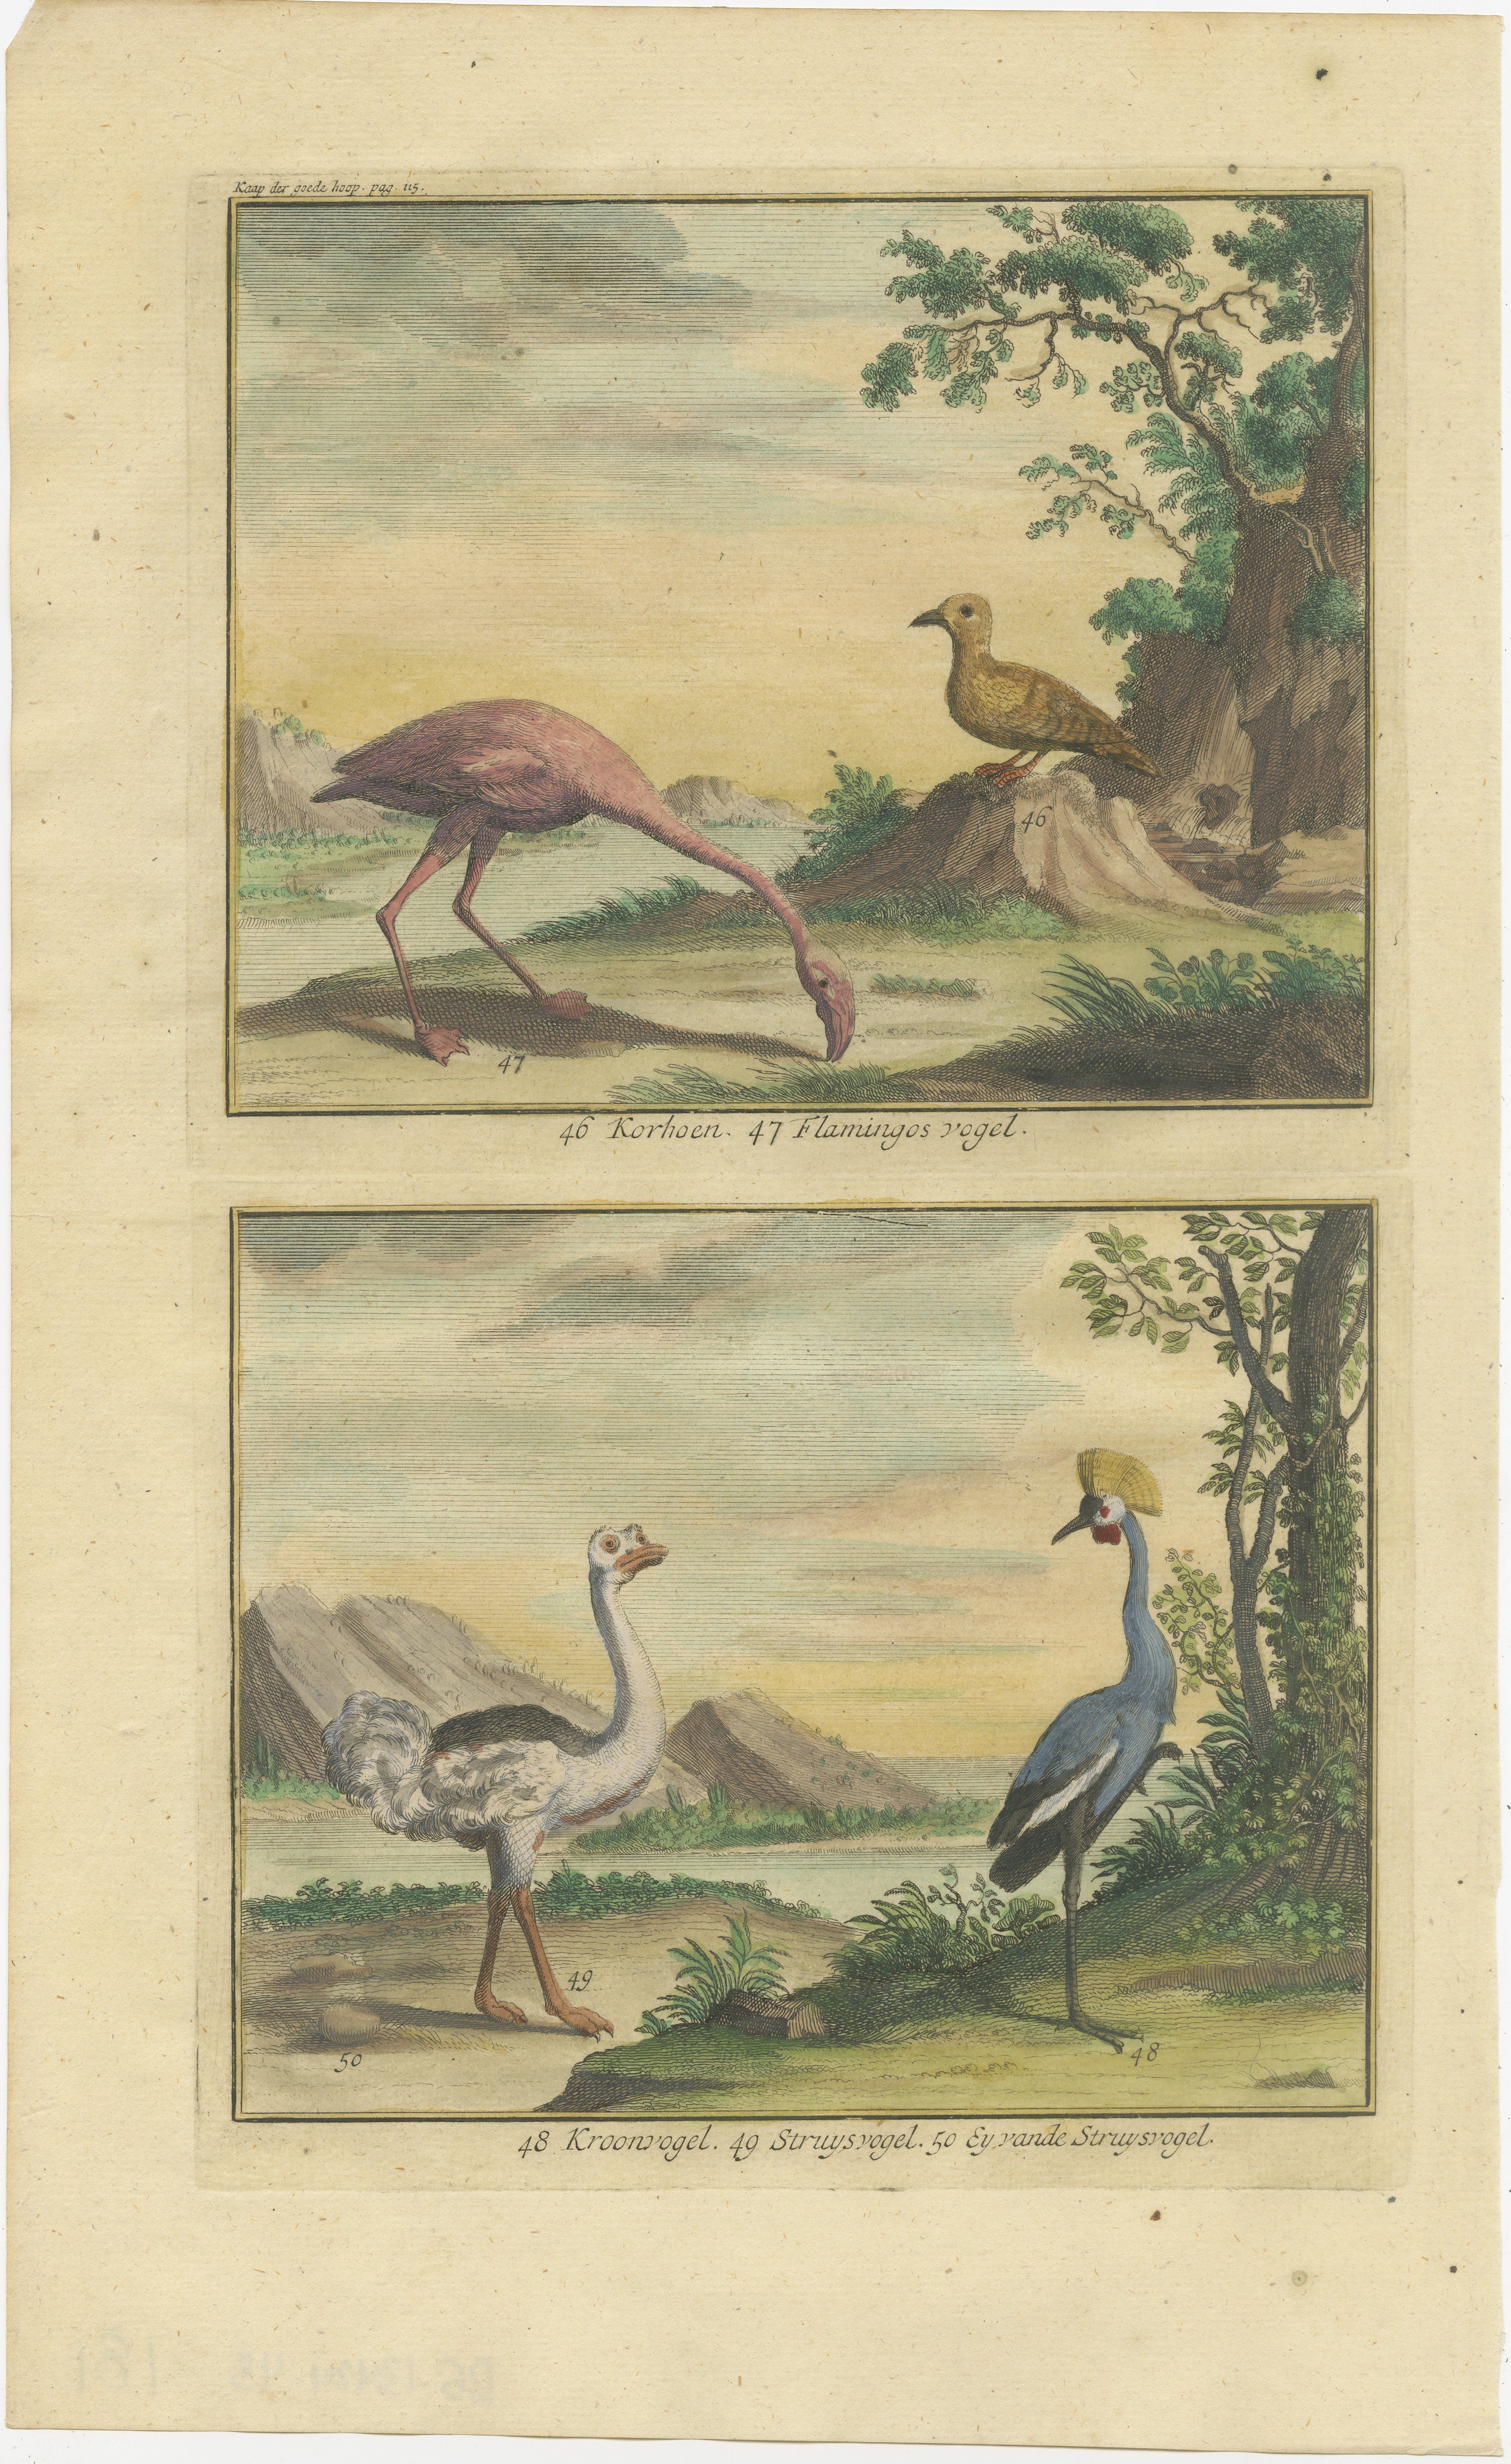 The hand-colored engraving features a selection of birds, each intricately detailed and labeled in Dutch. 

At position 46, the 